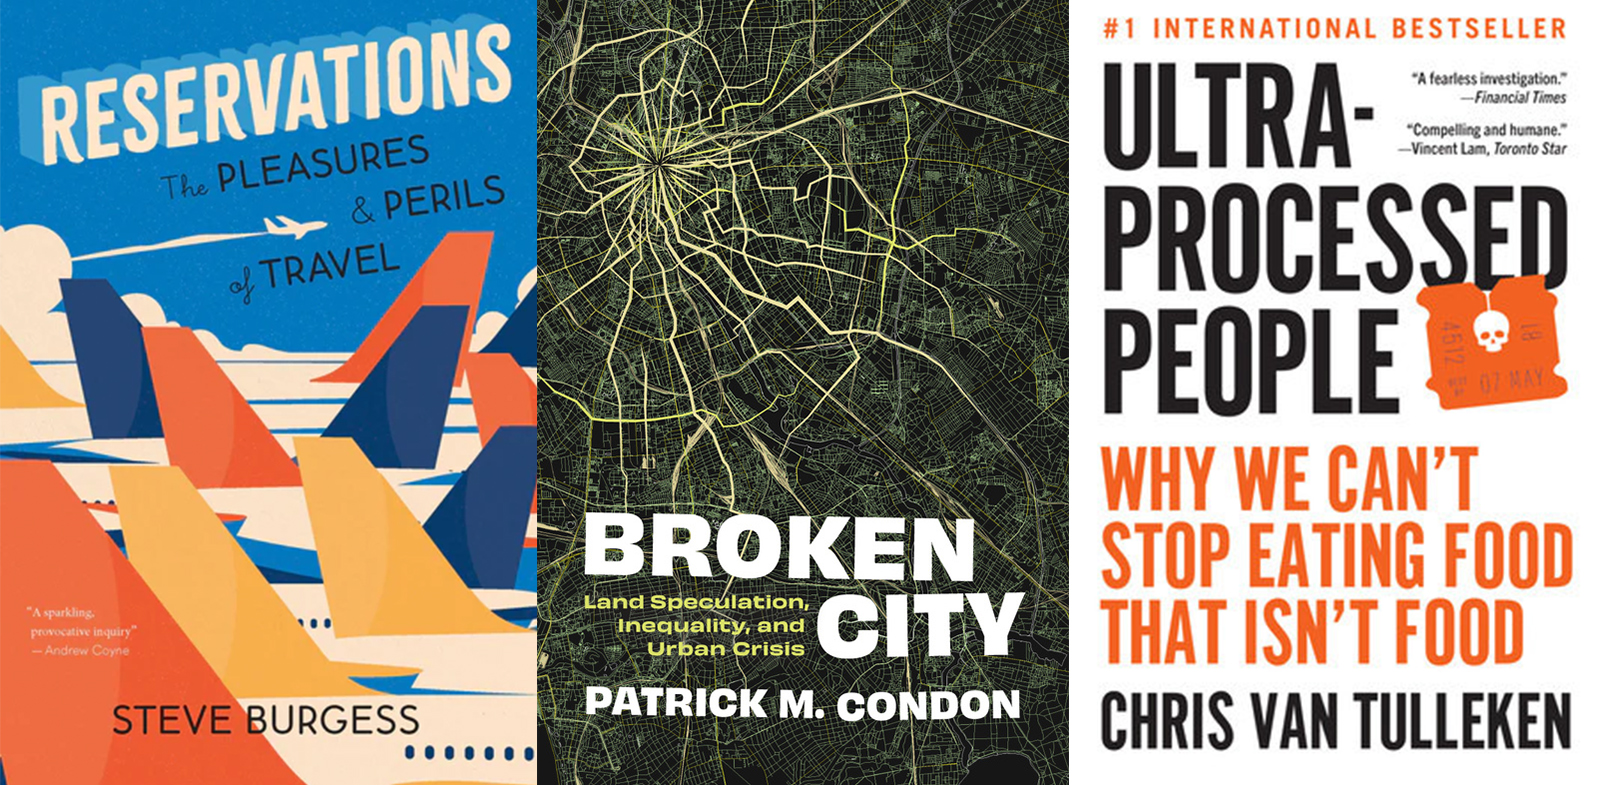 Three book covers, from left: 'Reservations' by Steve Burgess; 'Broken City' by Patrick M. Condon; 'Ultra-Processed People' by Chris van Tulleken.